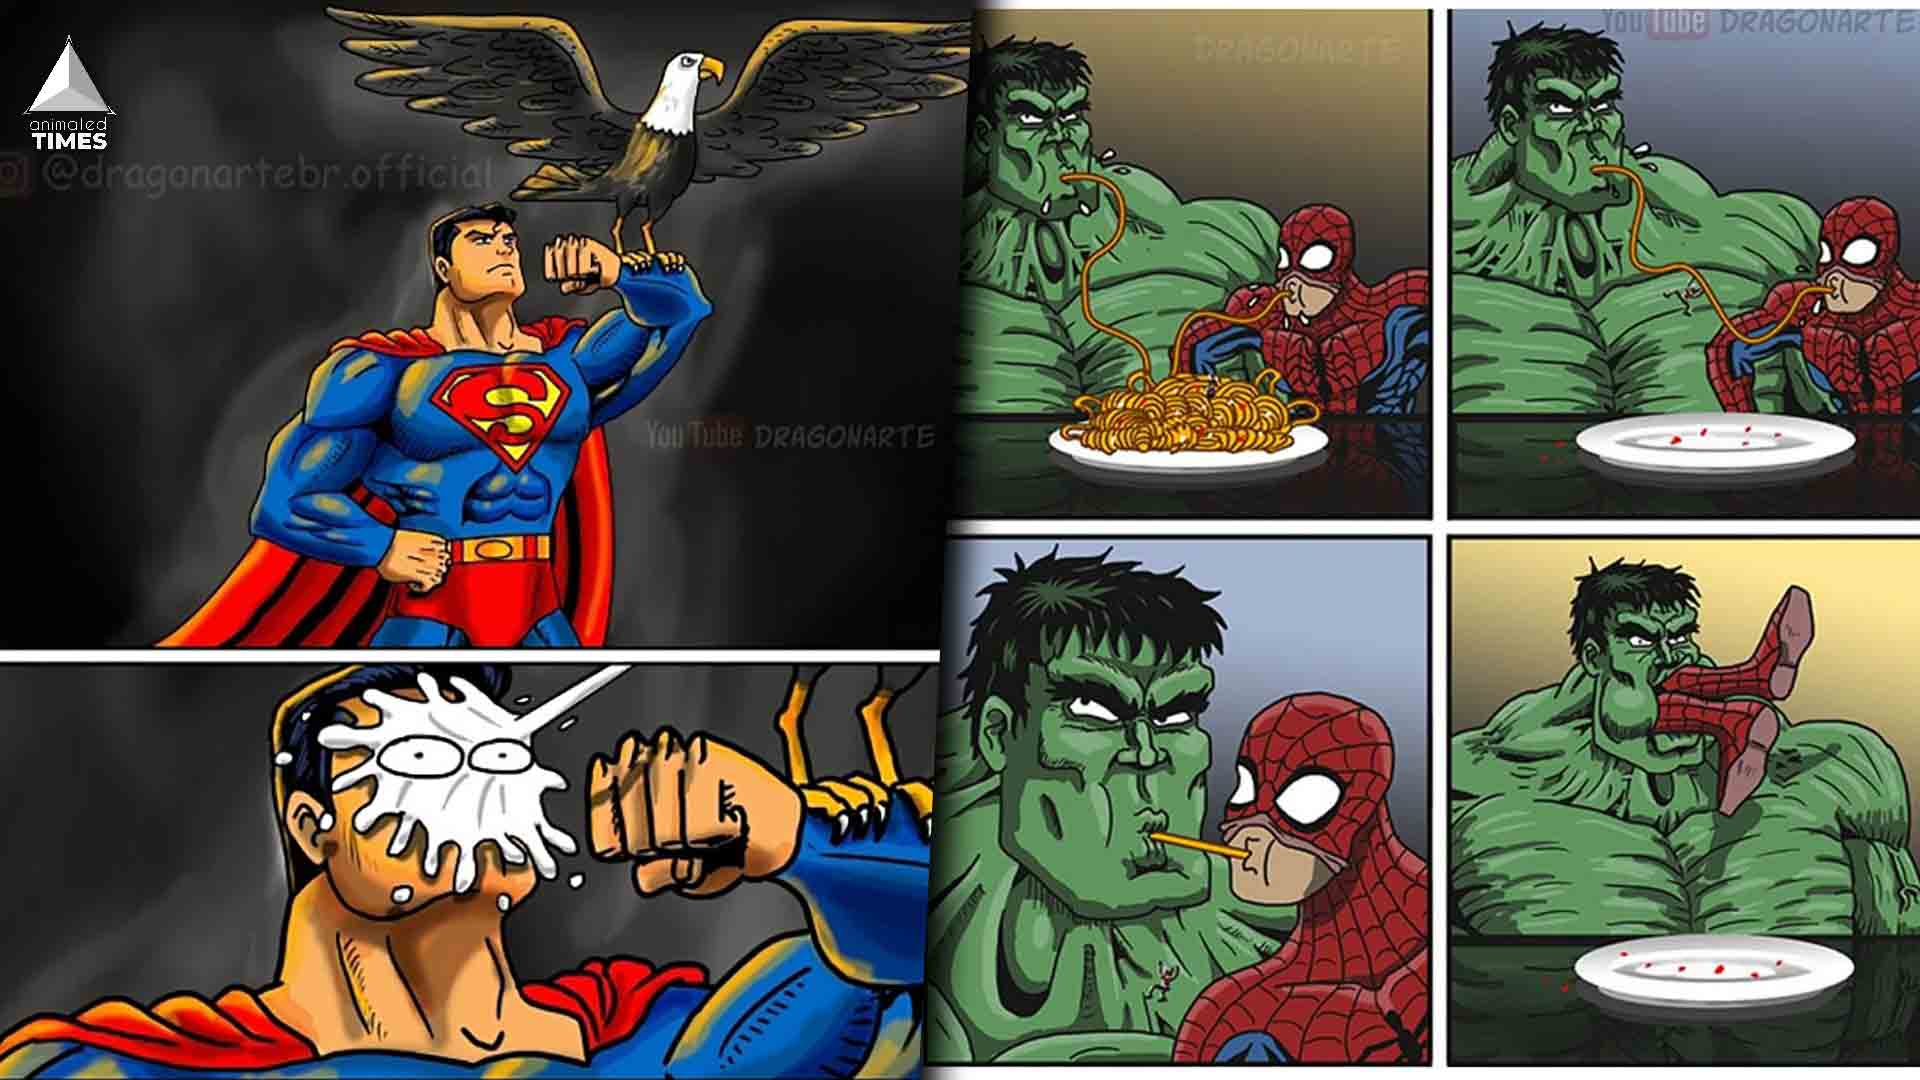 Funny Comics Depicting Daily Struggles Of Superheroes! - Animated Times